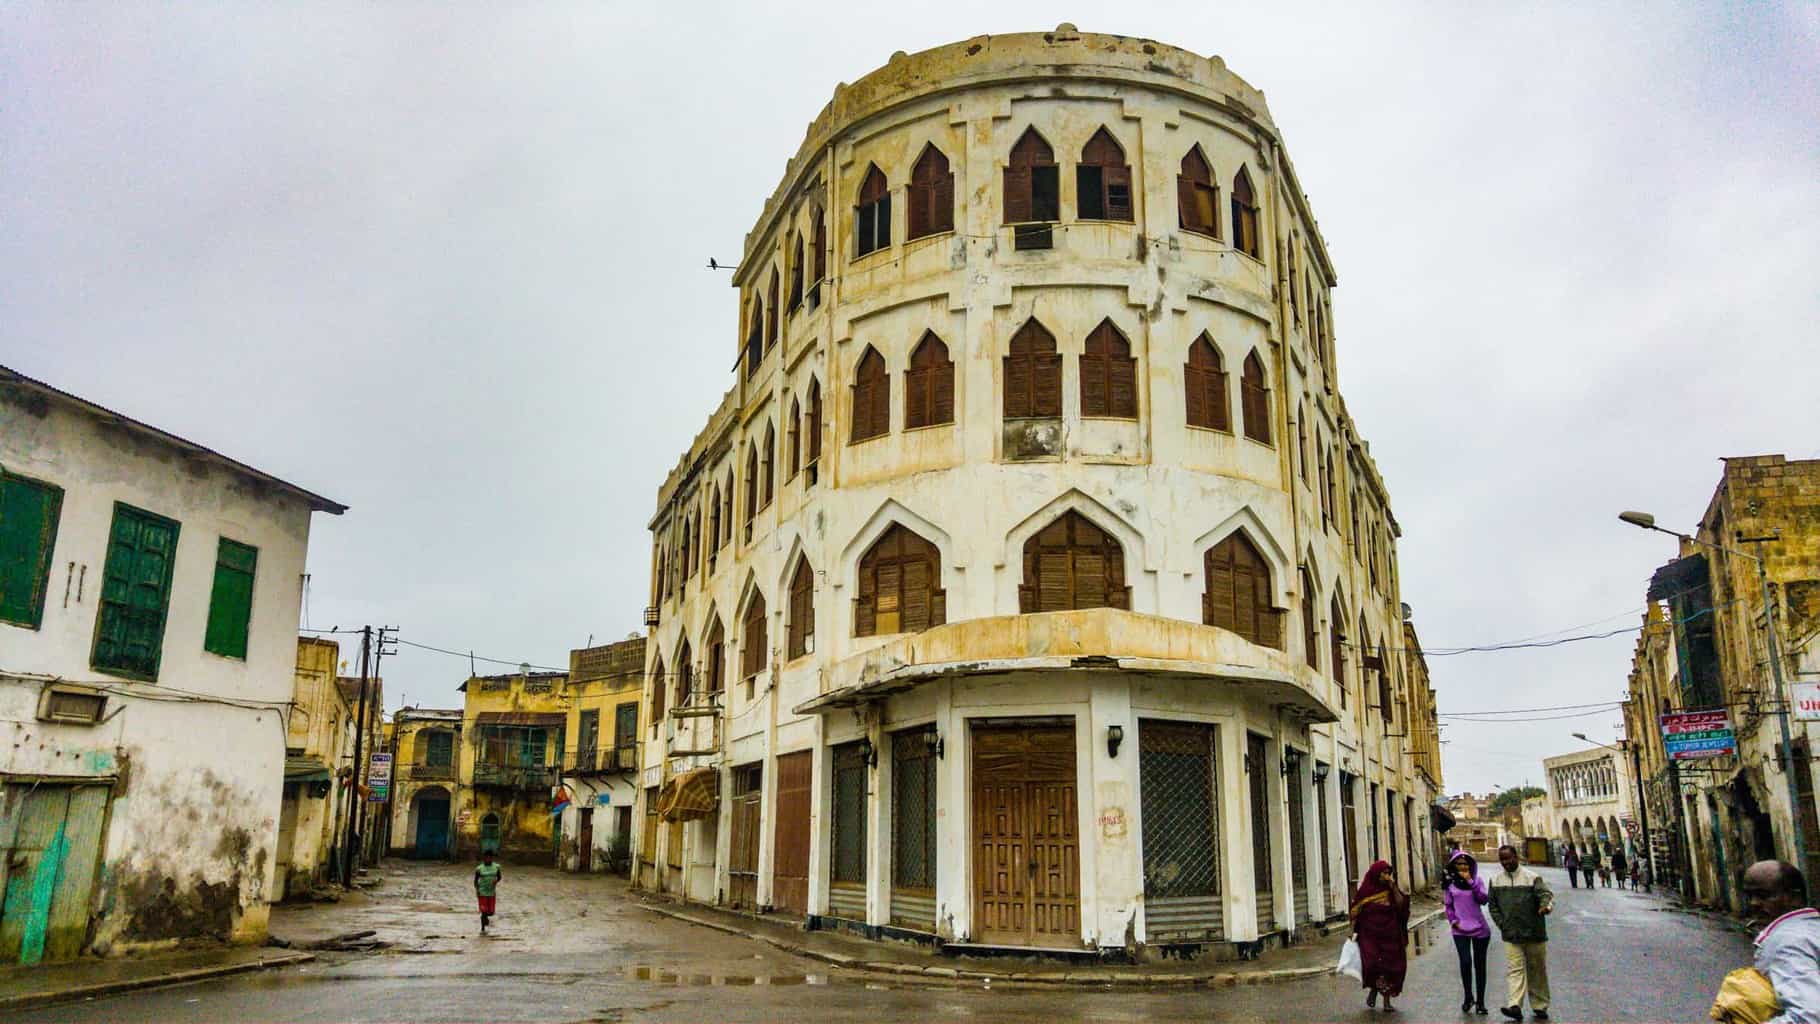 The "Hotel Torino" built in 1938. now closed down in Massawa